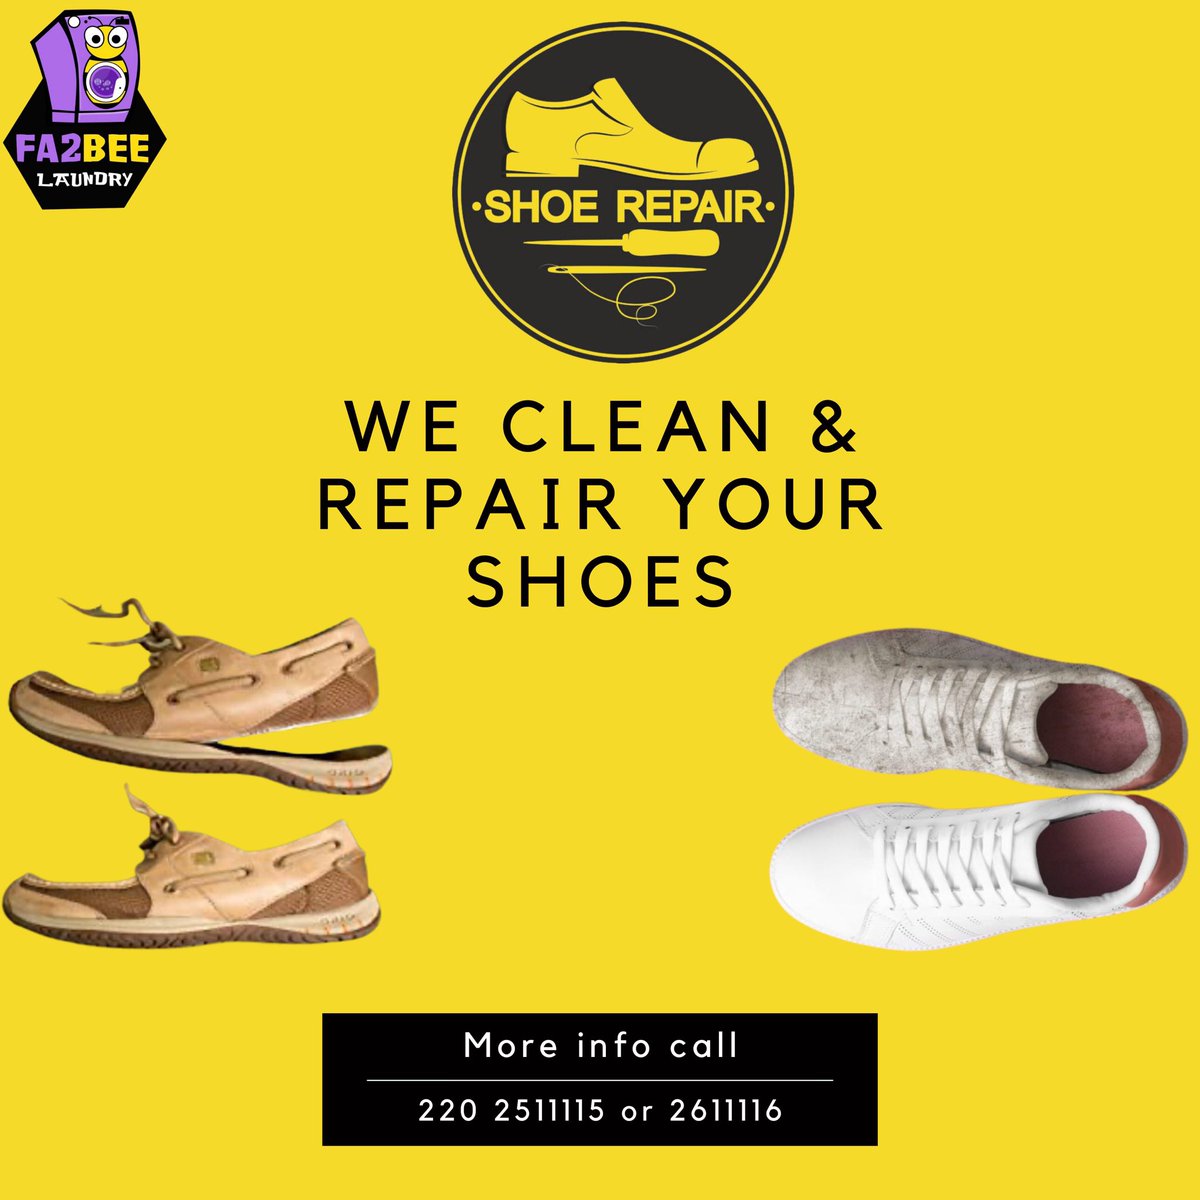 Psst! Come here. Did you know, in addition to cleaning your shoes, we also repair any and all damages to it?

How cool is that?! 

#FA2BEELaundryServices #ShoeCleaning #ShoeRepair #LaundryServices #Gambia